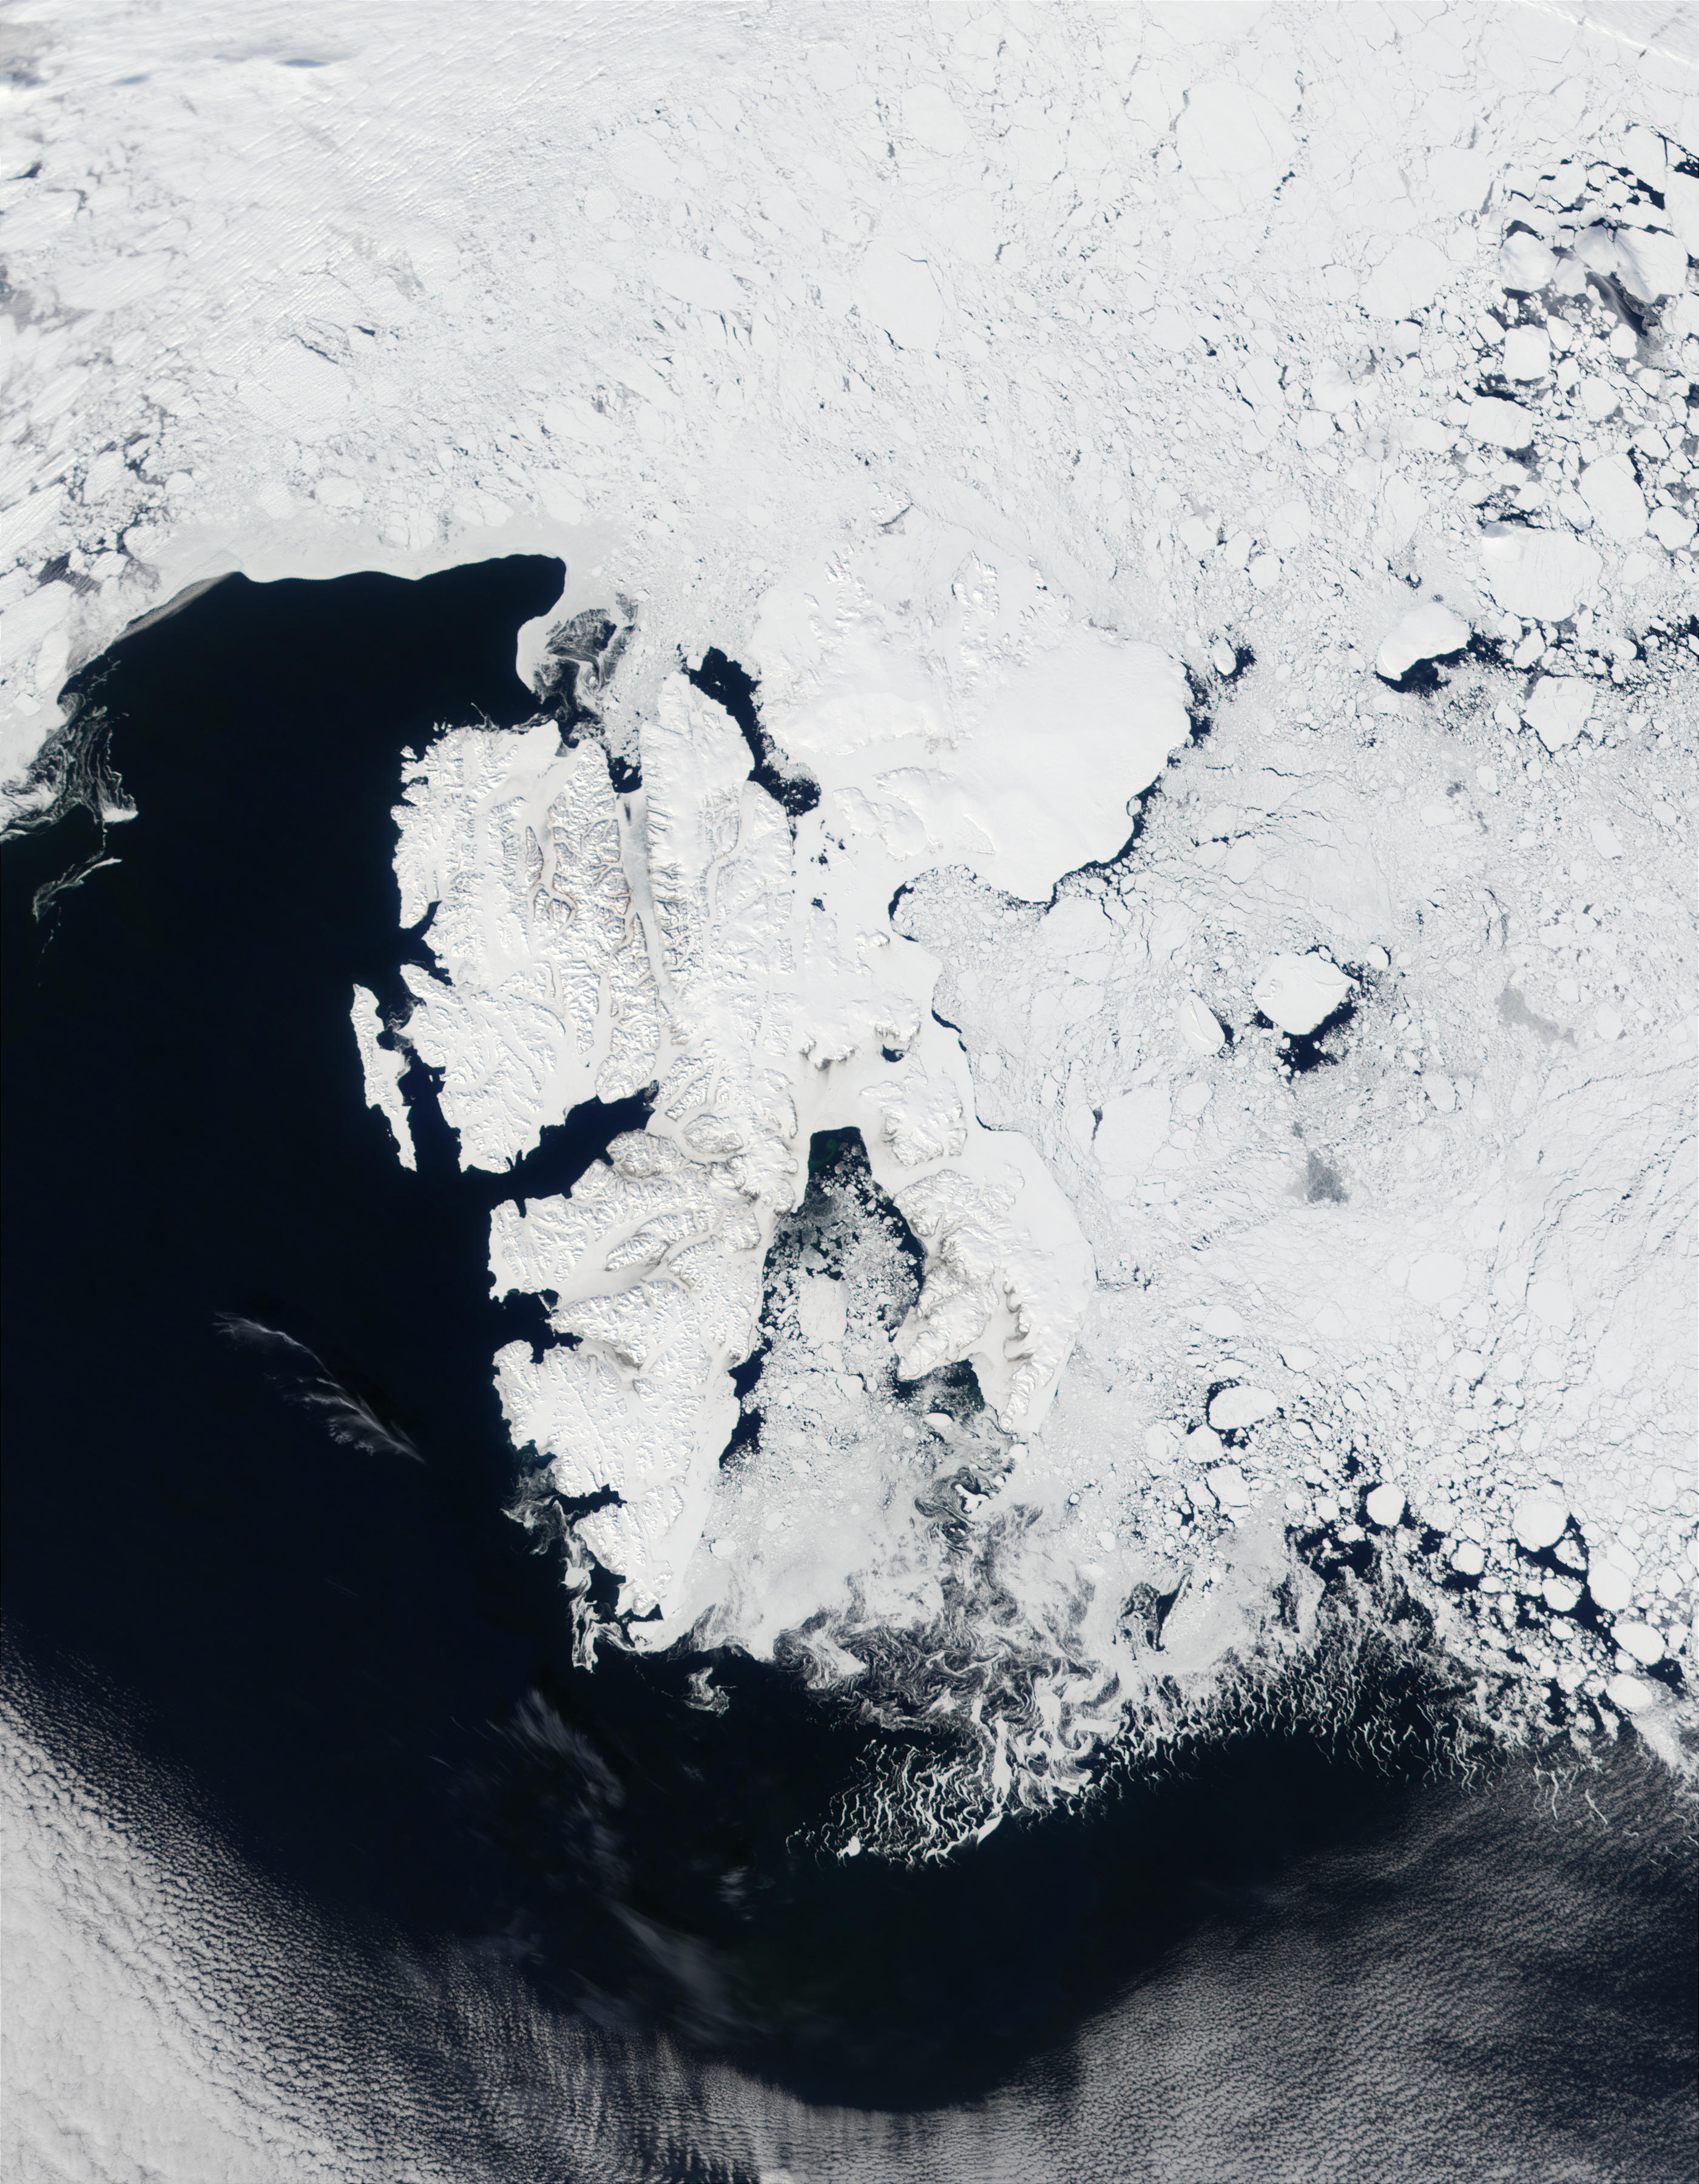 Svalbard, Arctic Ocean - related image preview